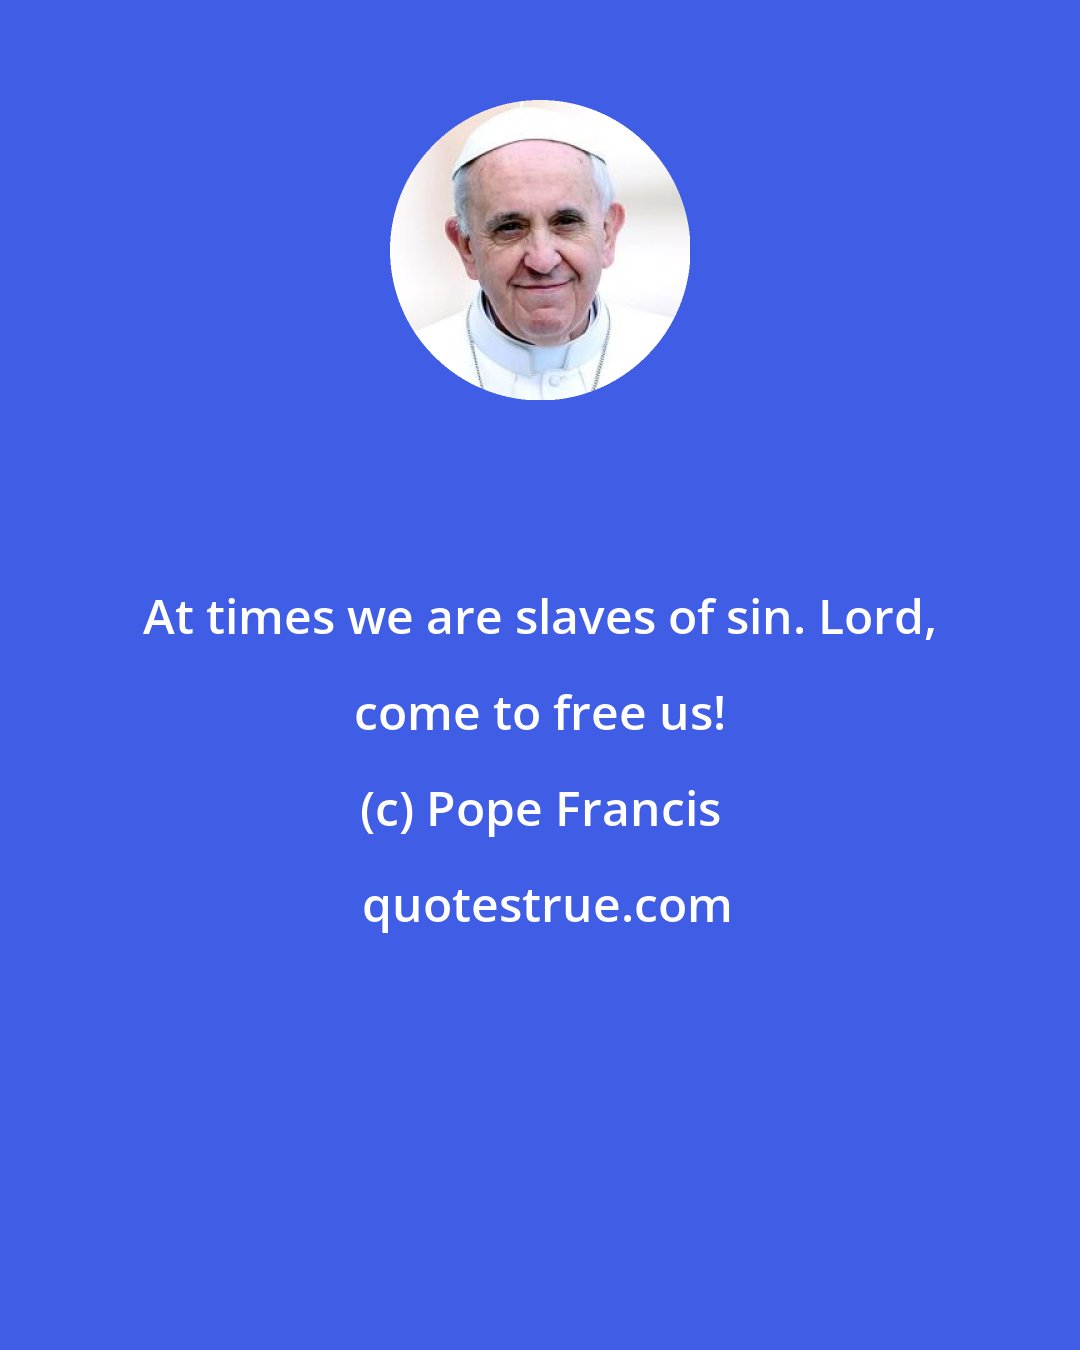 Pope Francis: At times we are slaves of sin. Lord, come to free us!